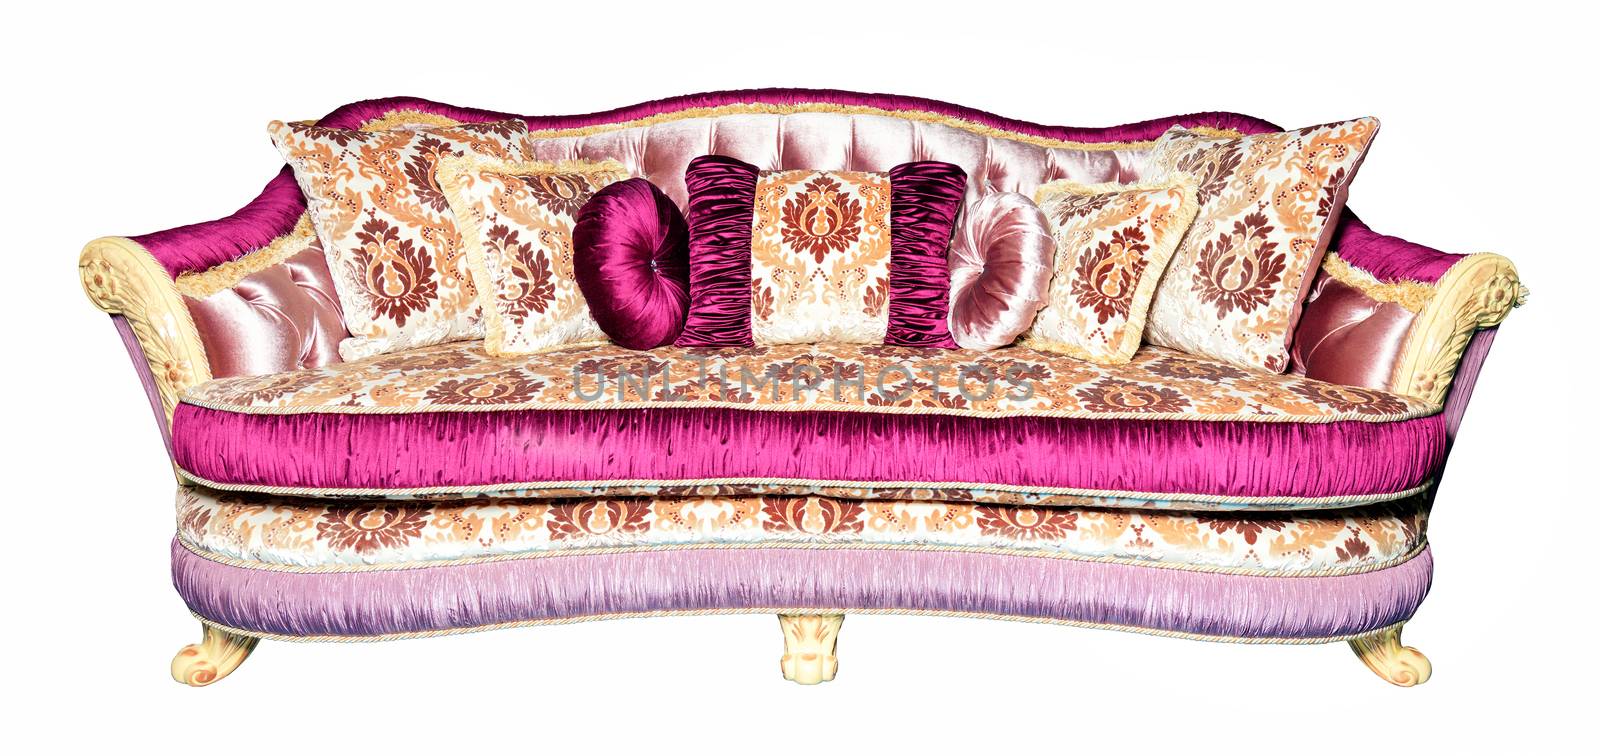 Luxurious sofa upholstered in expensive brocade textile fabric isolated on a white background. by Sergii